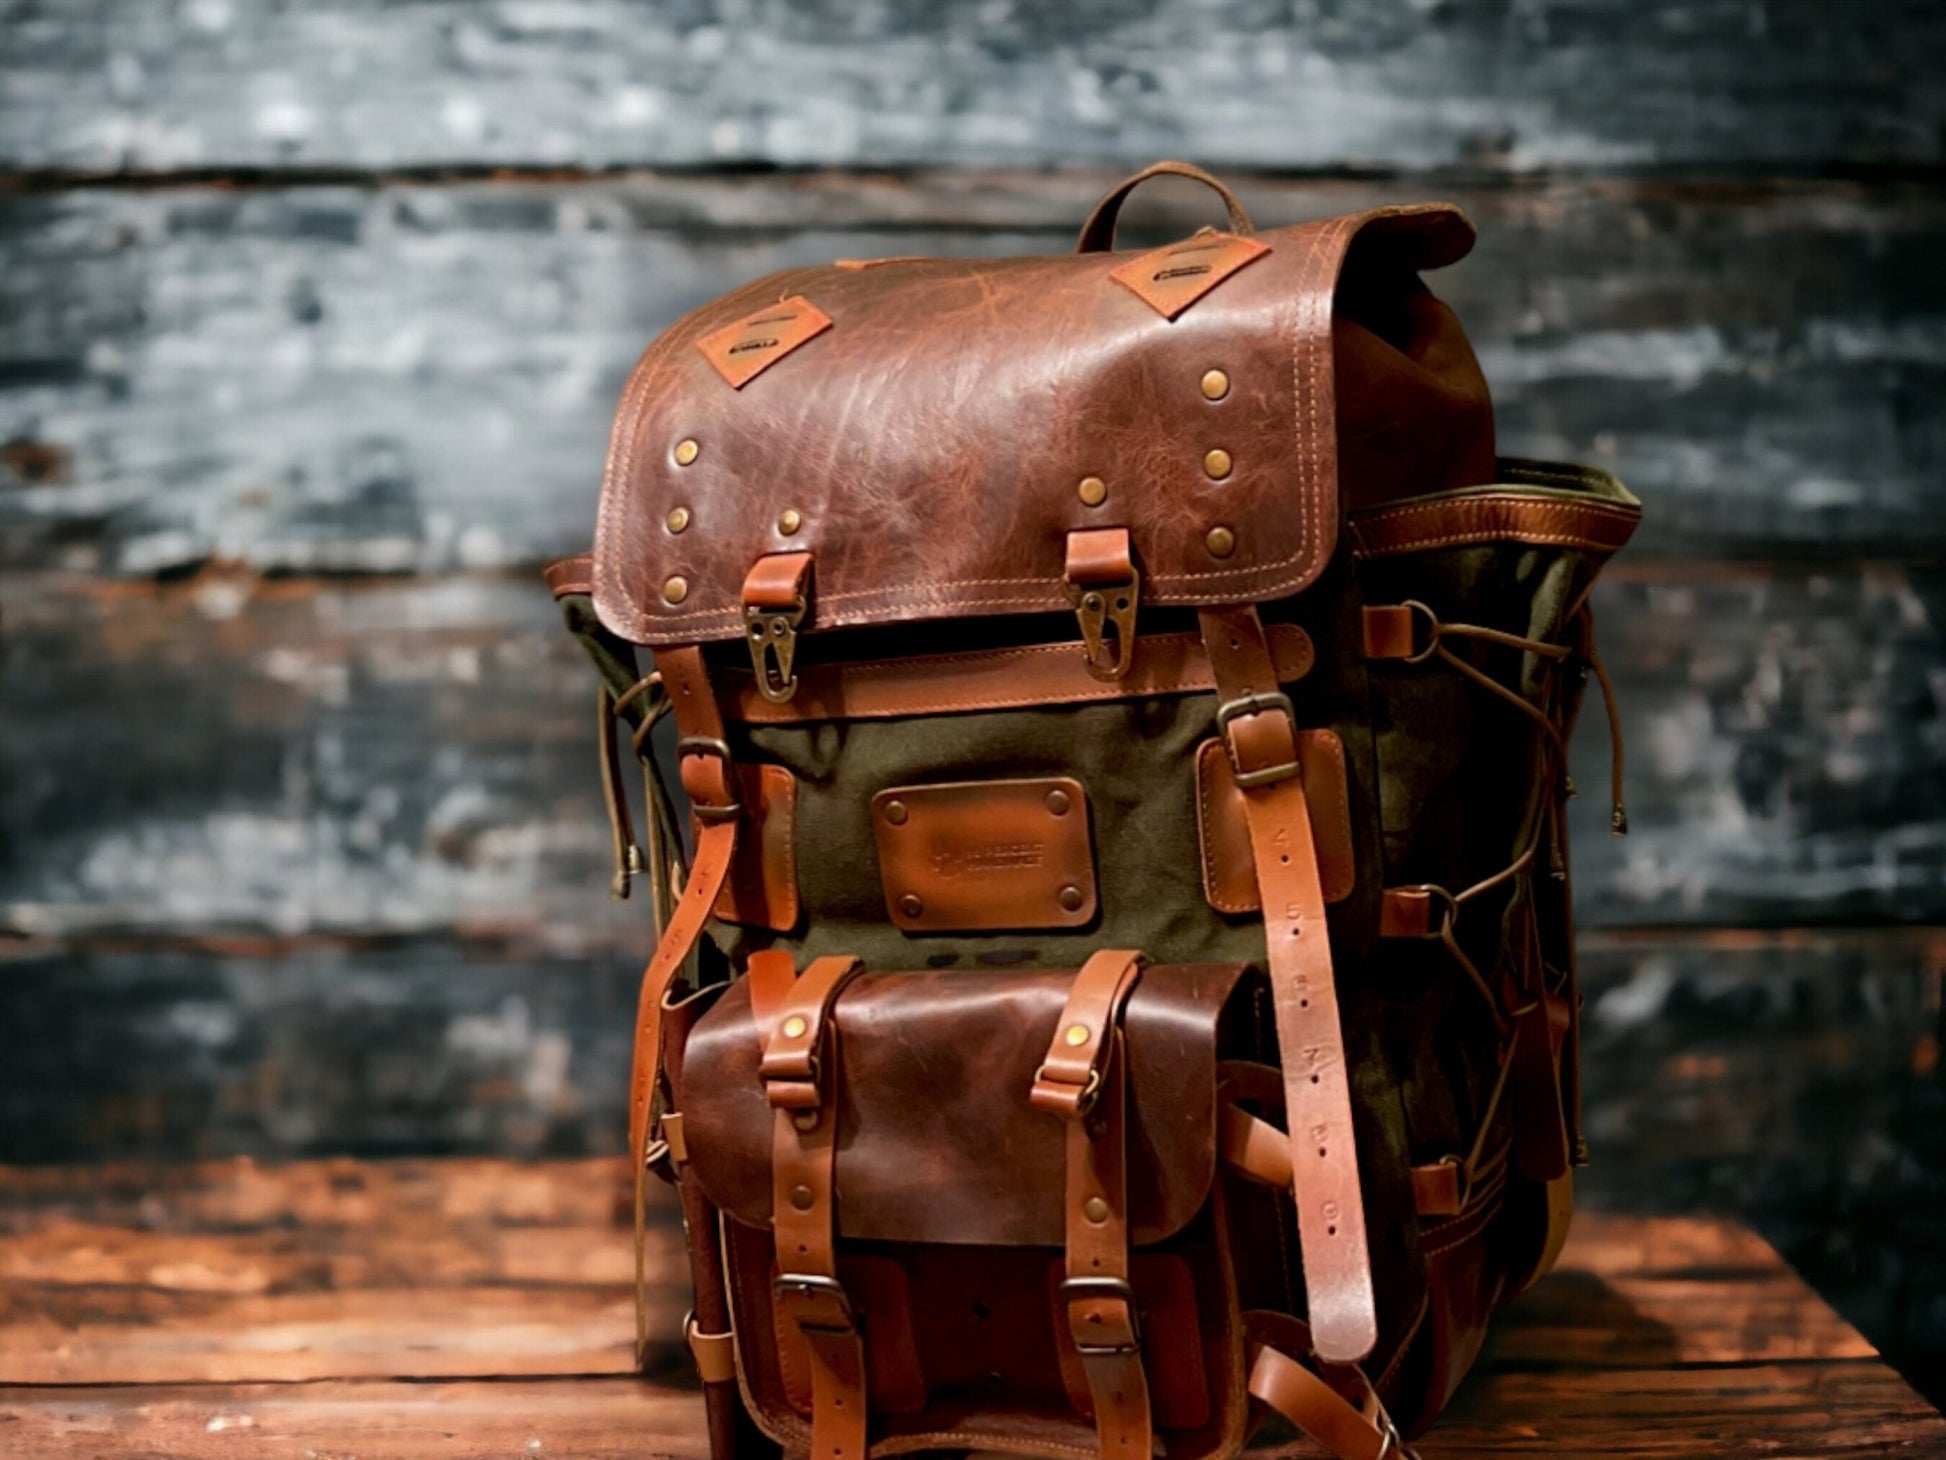 Handmade | Waxed Canvas Backpack | 50 L | Leather Backpack | Daily Use | Bushcraft, Travel, Camping, Hunting, Fishing, Sports bag  99percenthandmade   